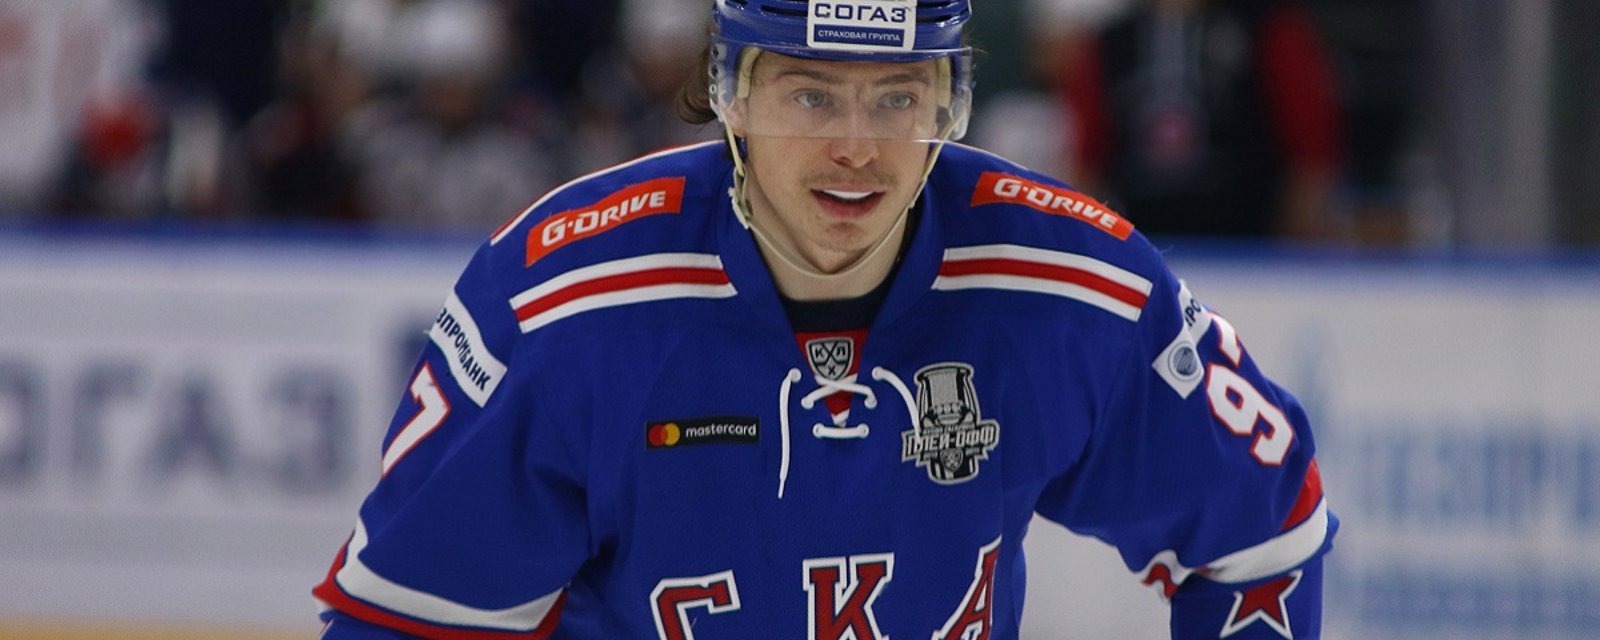 Breaking: The KHL's points leader has just signed with an NHL playoff team.